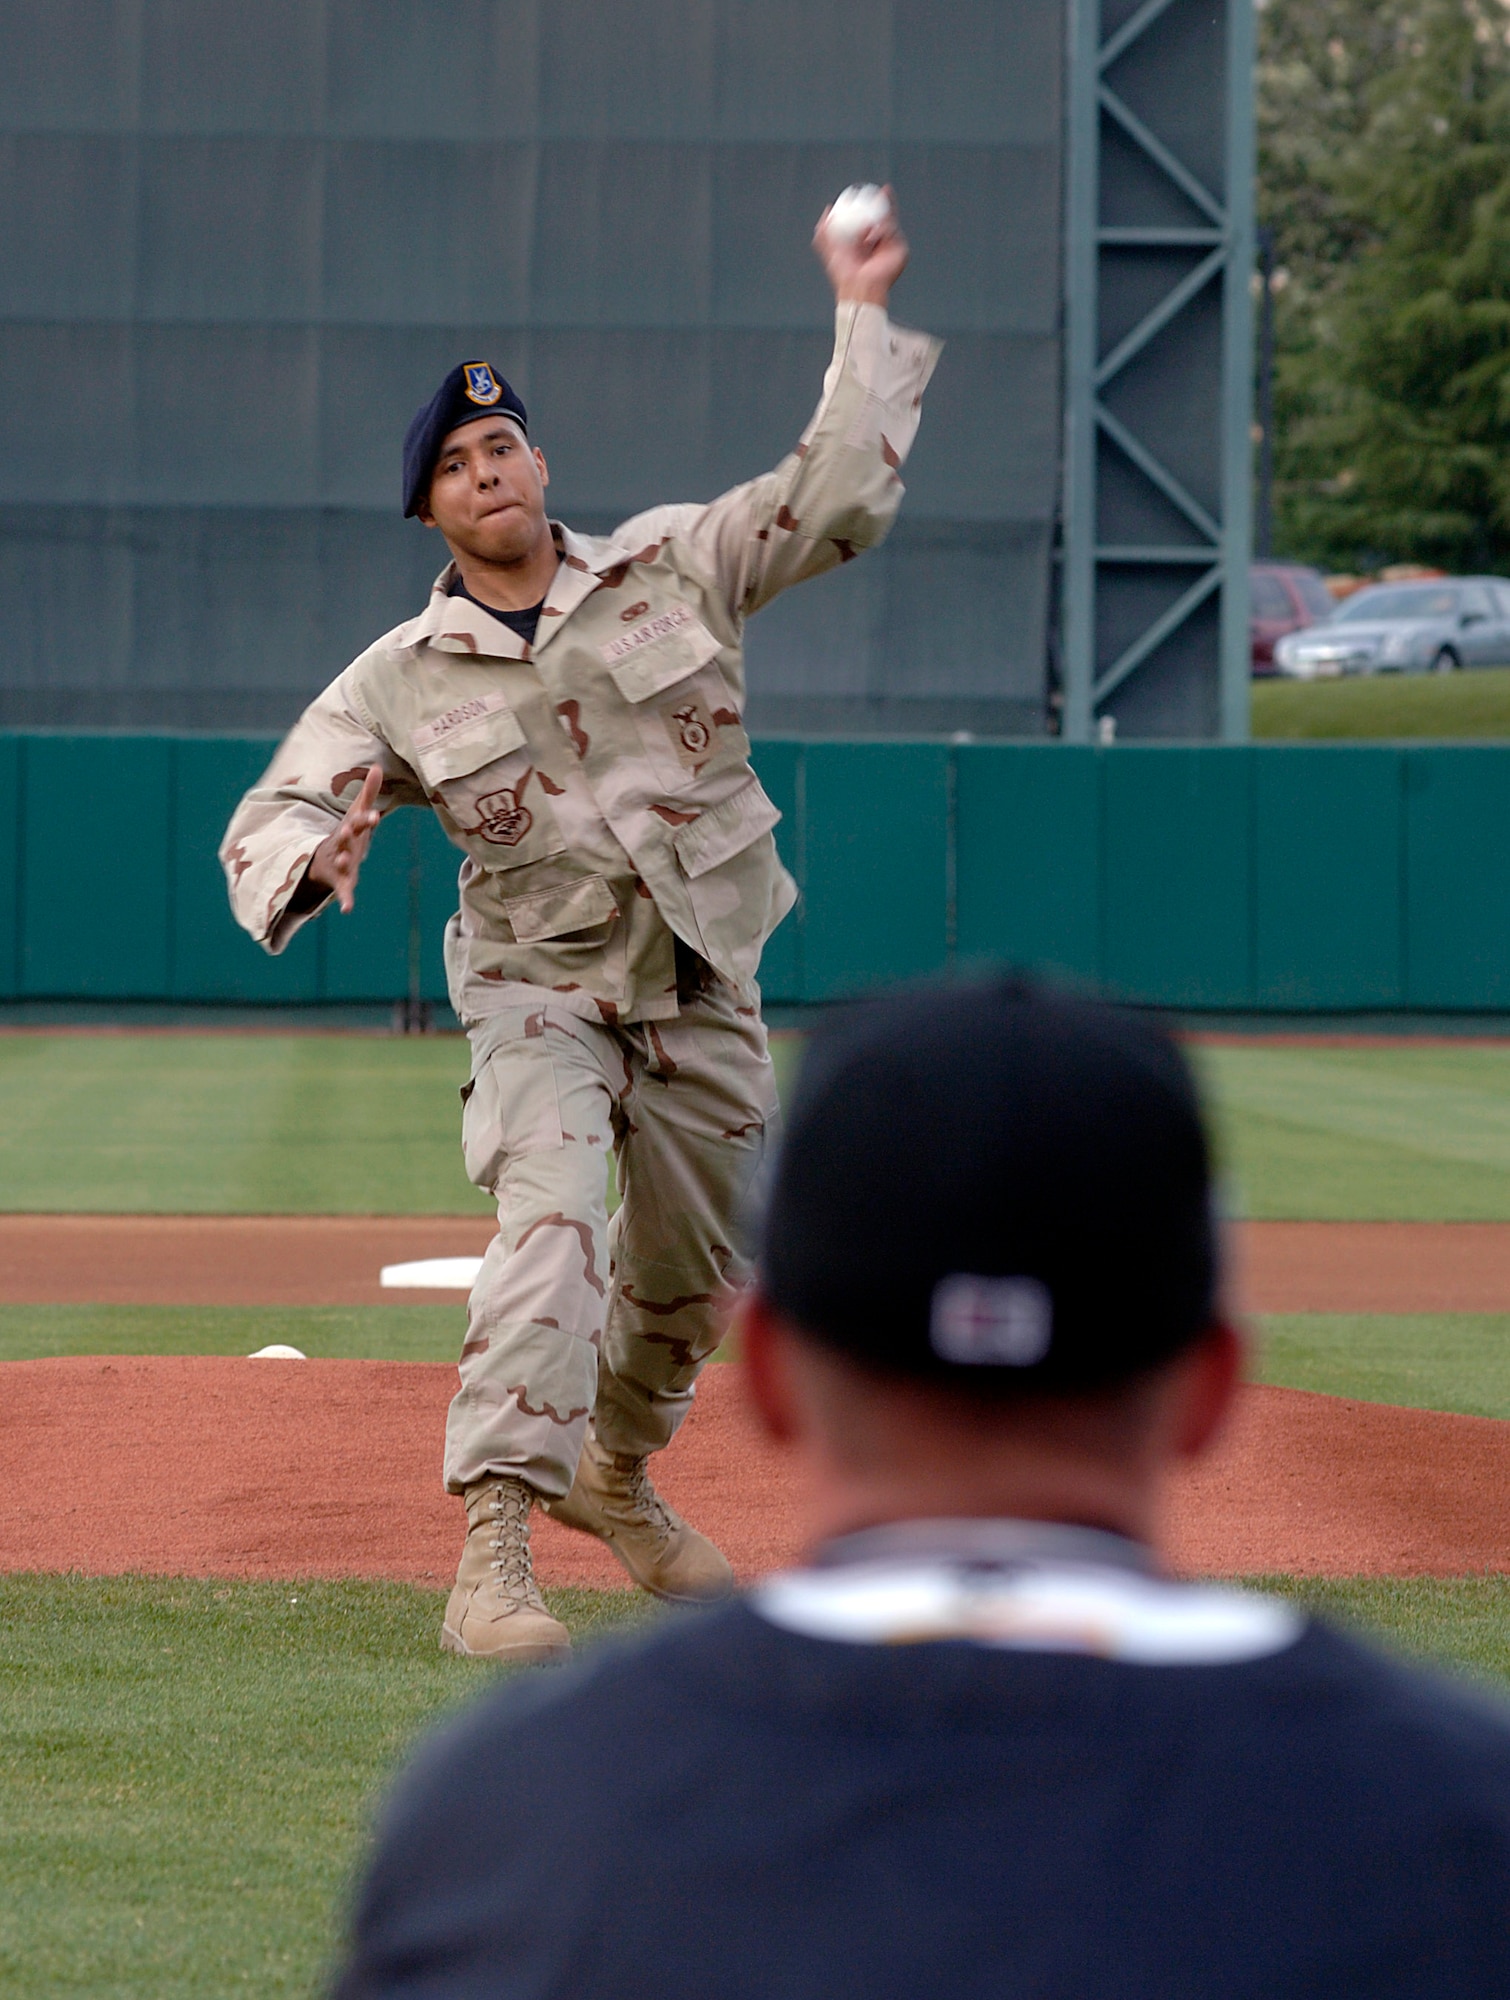 Staff Sgt. Raymond Hardson throws out the first pitch before a local minor league baseball game June 4 during Air Force Week in California. The purpose of Air Force Week is to inform and educate the American public about the importance and roles of the Air Force in America's national defense. Sergeant Hardson is a security forces Airman from Beale Air Force Base, Calif. (U.S. Air Force photo/Tech. Sgt. Larry A. Simmons)
